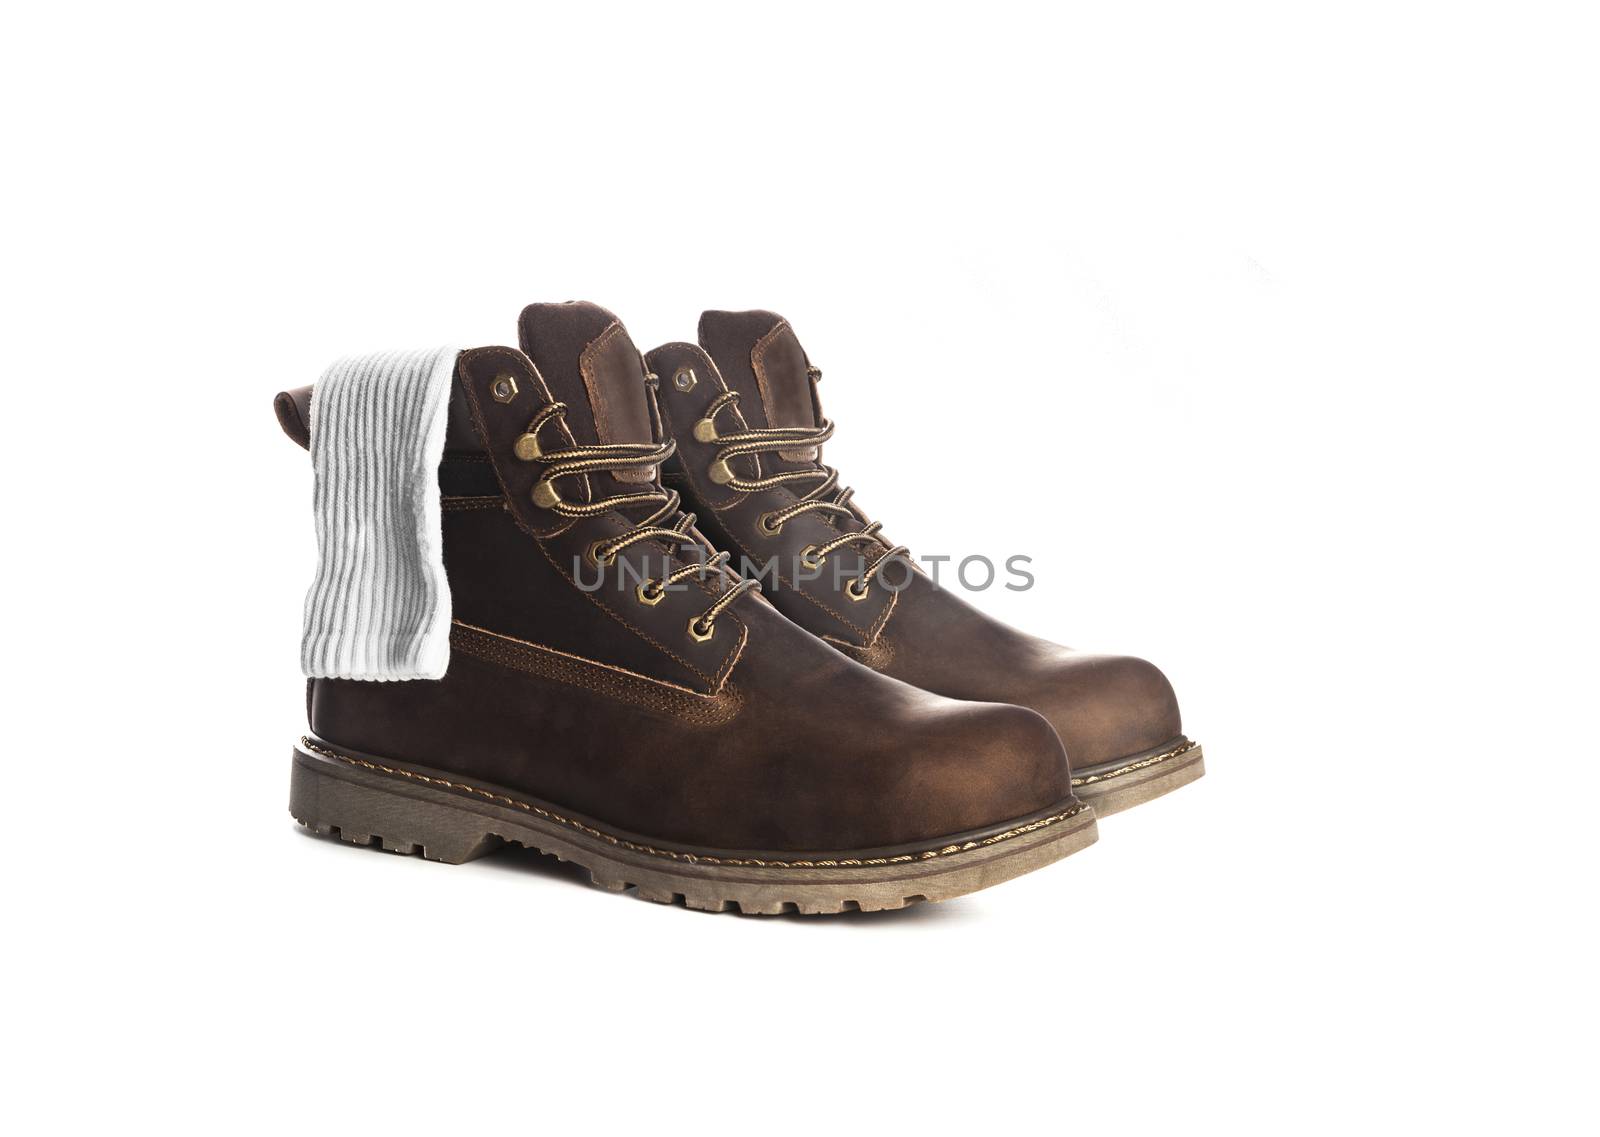 Man ankle boots, brown color, with nubuck leather, with white socks inside. Isolated on white background, closed up